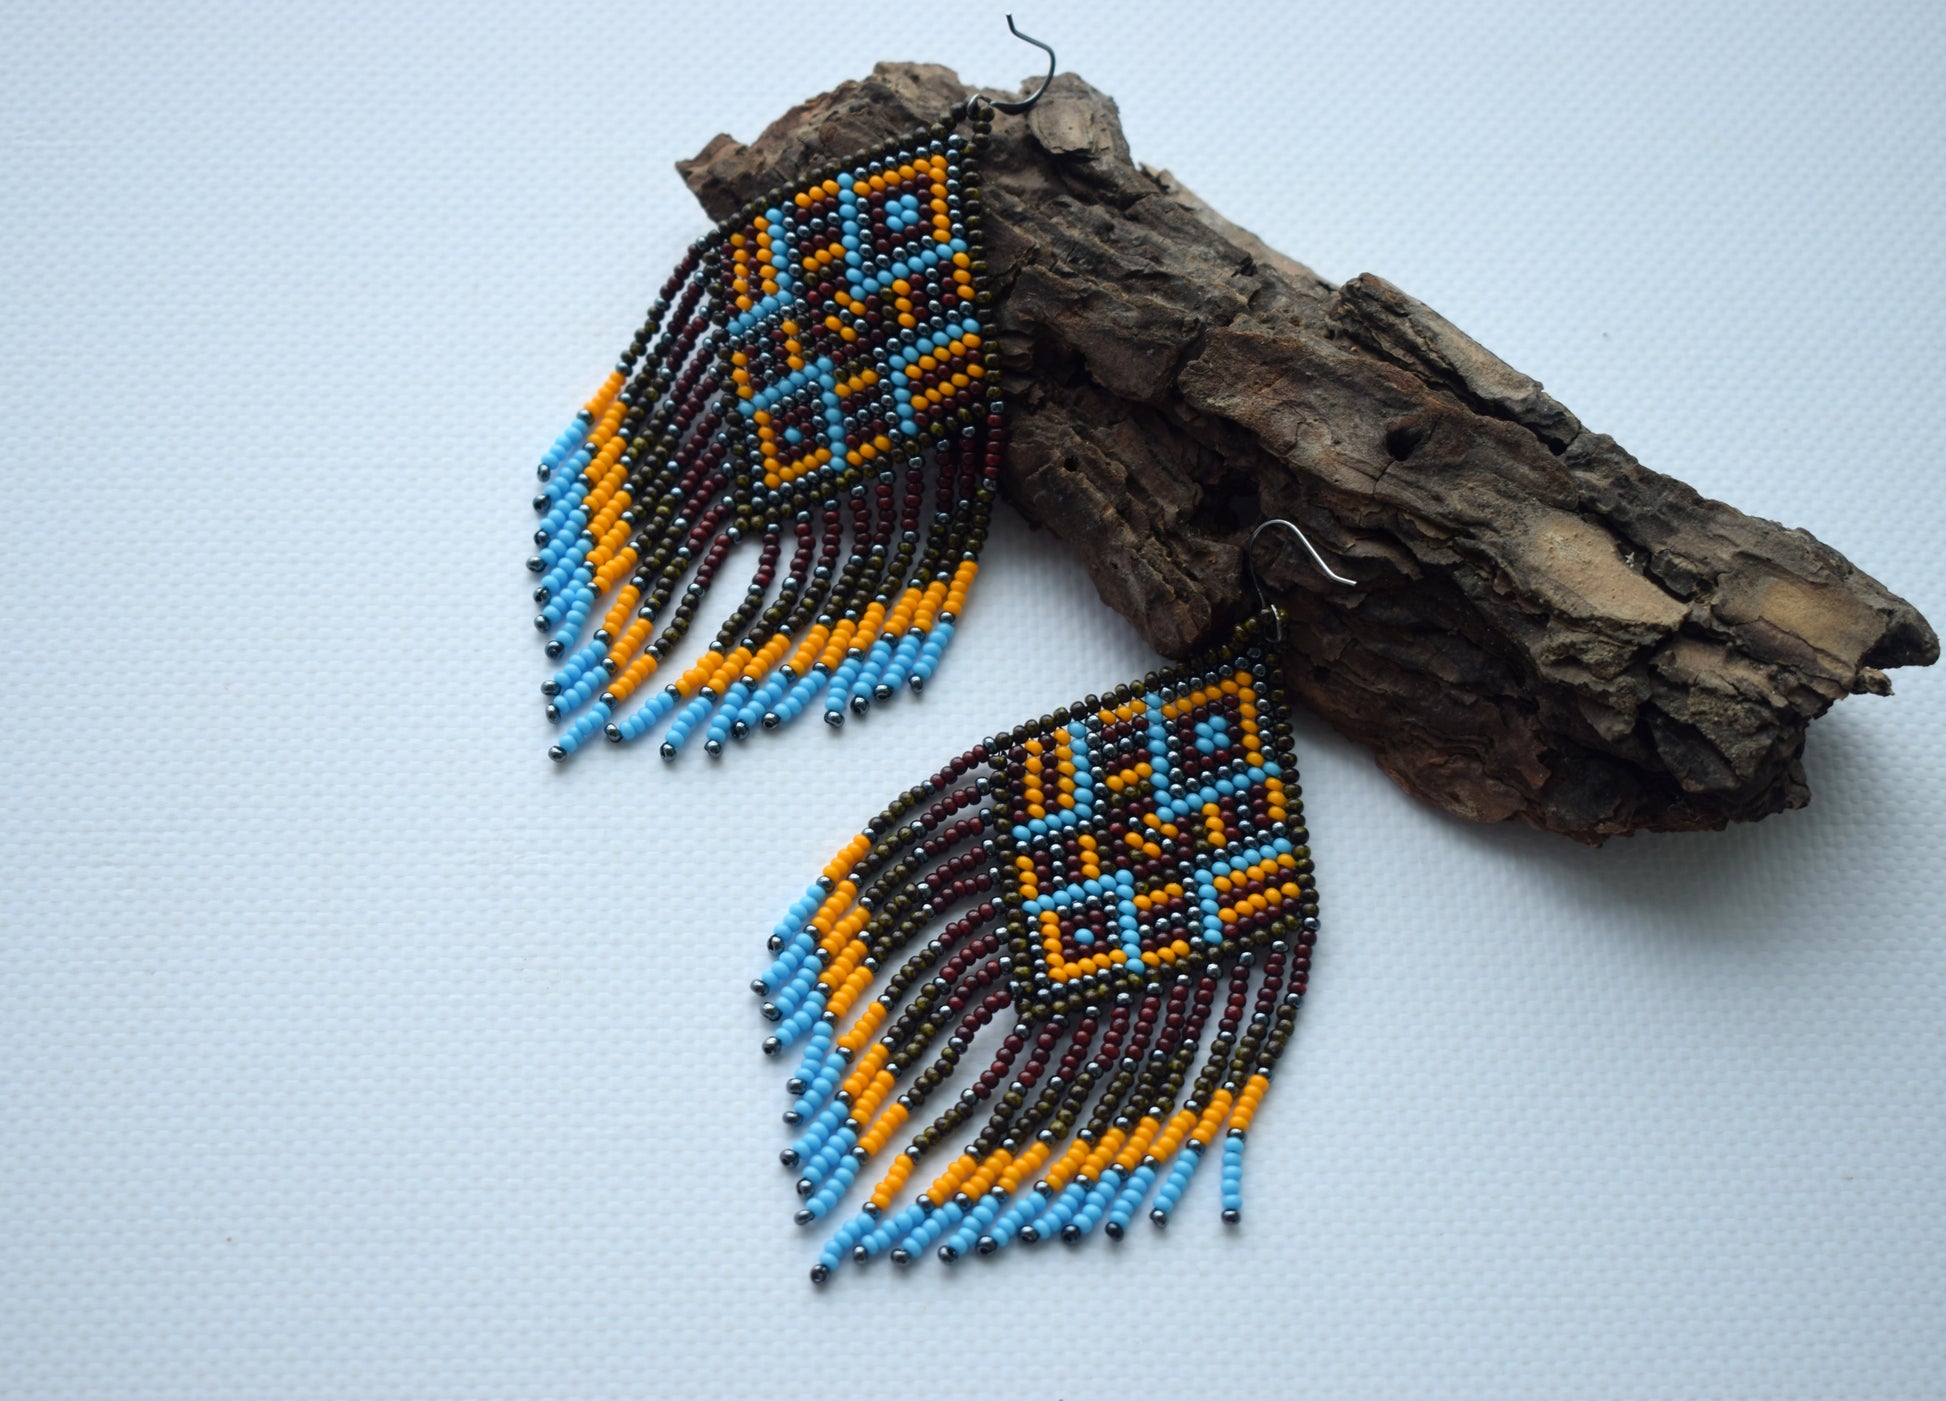 These are Native american beaded earrings